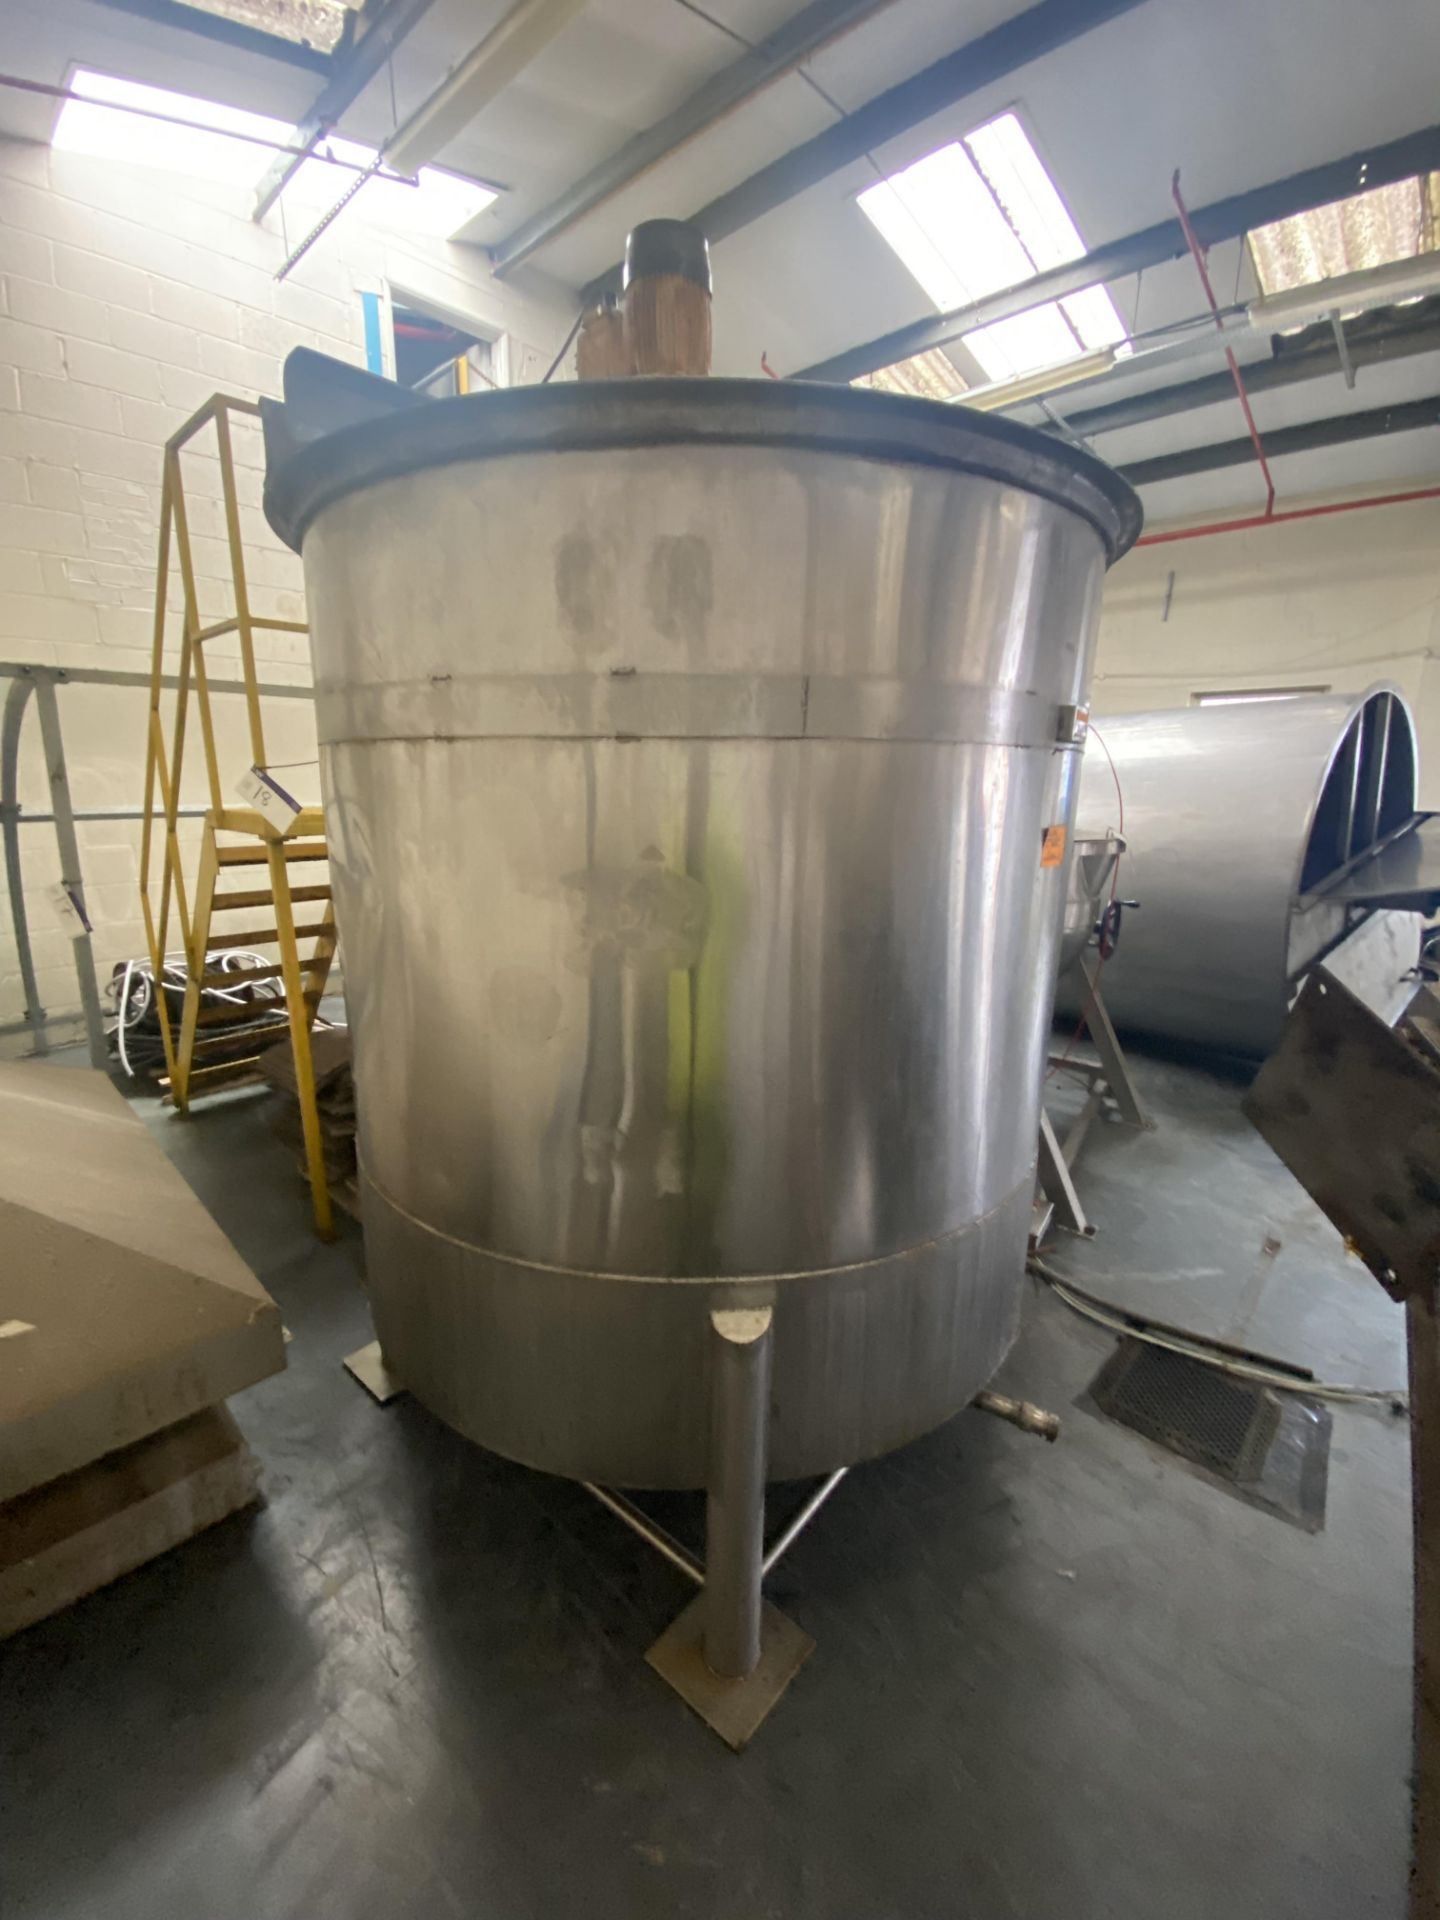 Greaves STAINLESS STEEL MIXING VESSEL, approx. 1.5m dia. x 1.6m deep, with vertical mounted mixer - Image 3 of 4